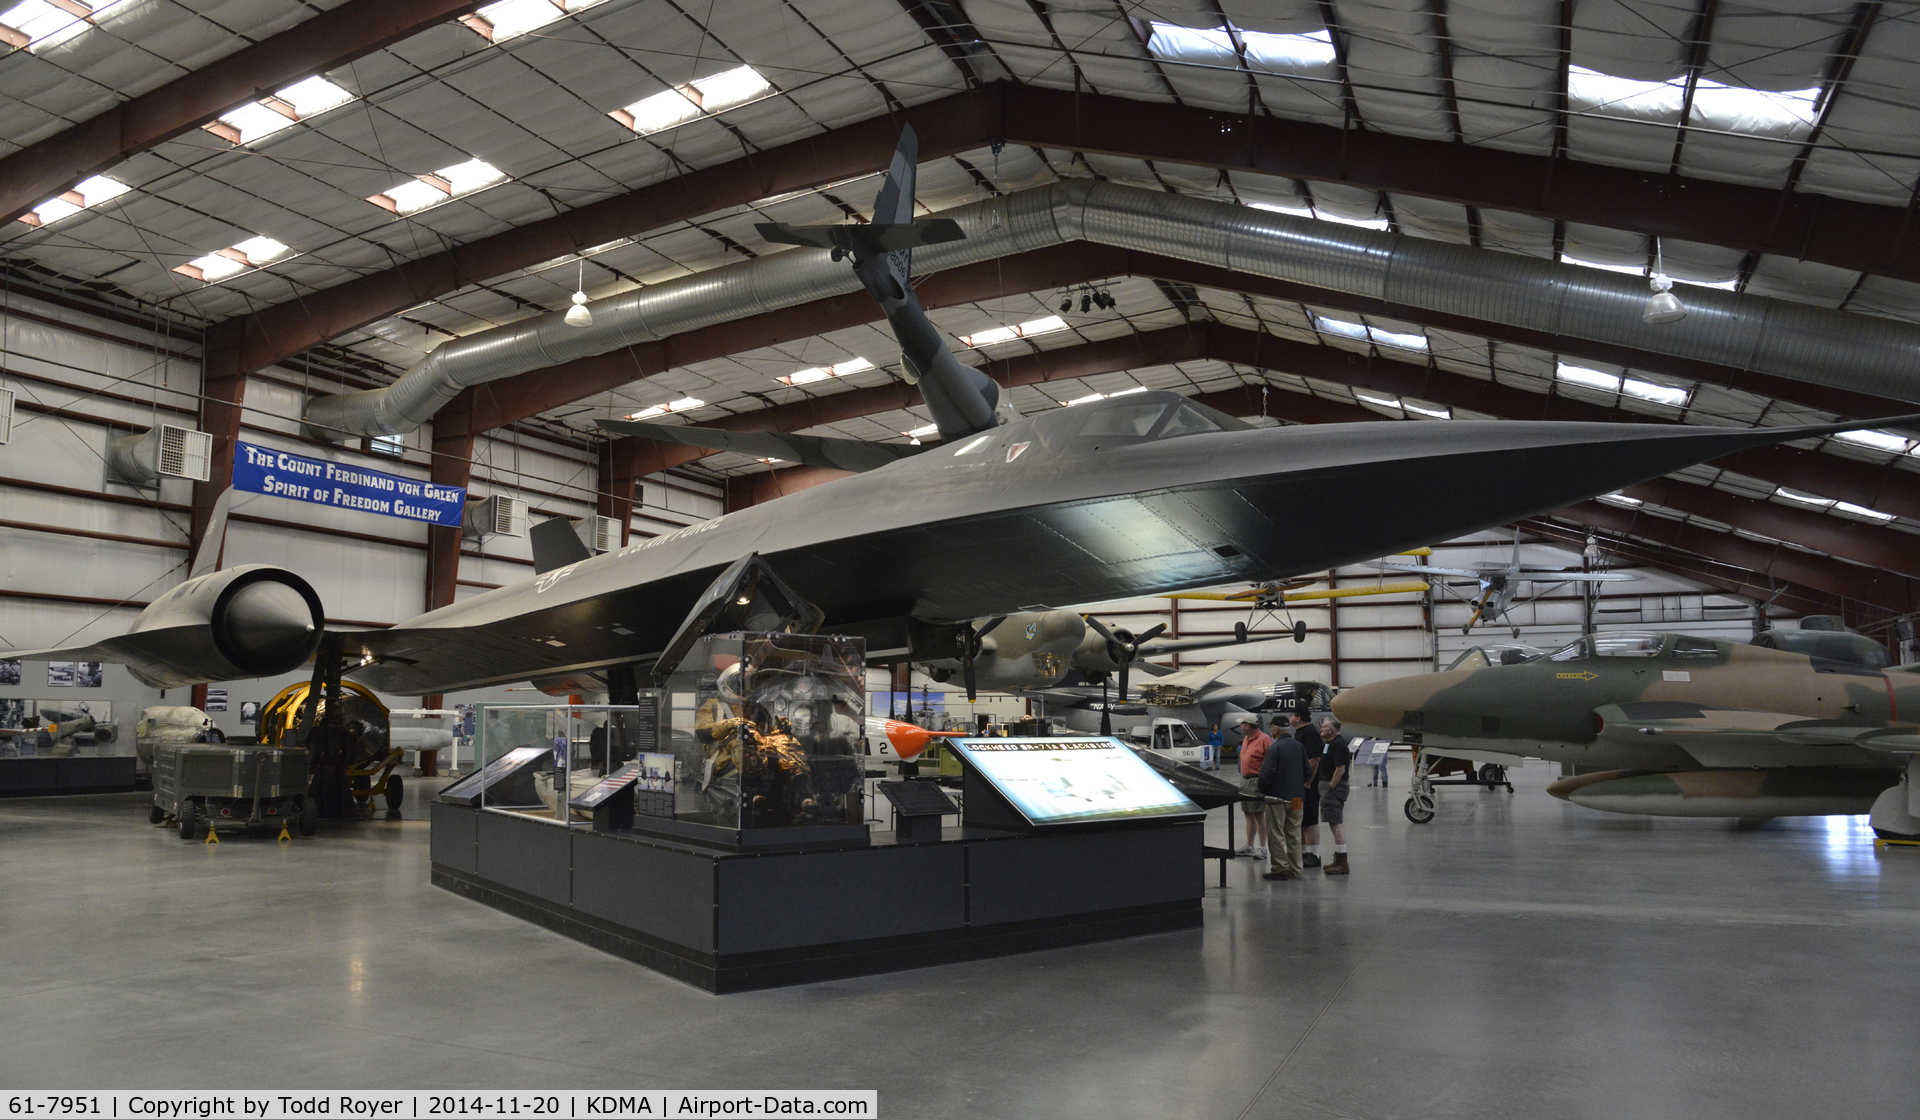 61-7951, 1961 Lockheed SR-71A Blackbird C/N 2002, On display at the Pima Air and Space Museum